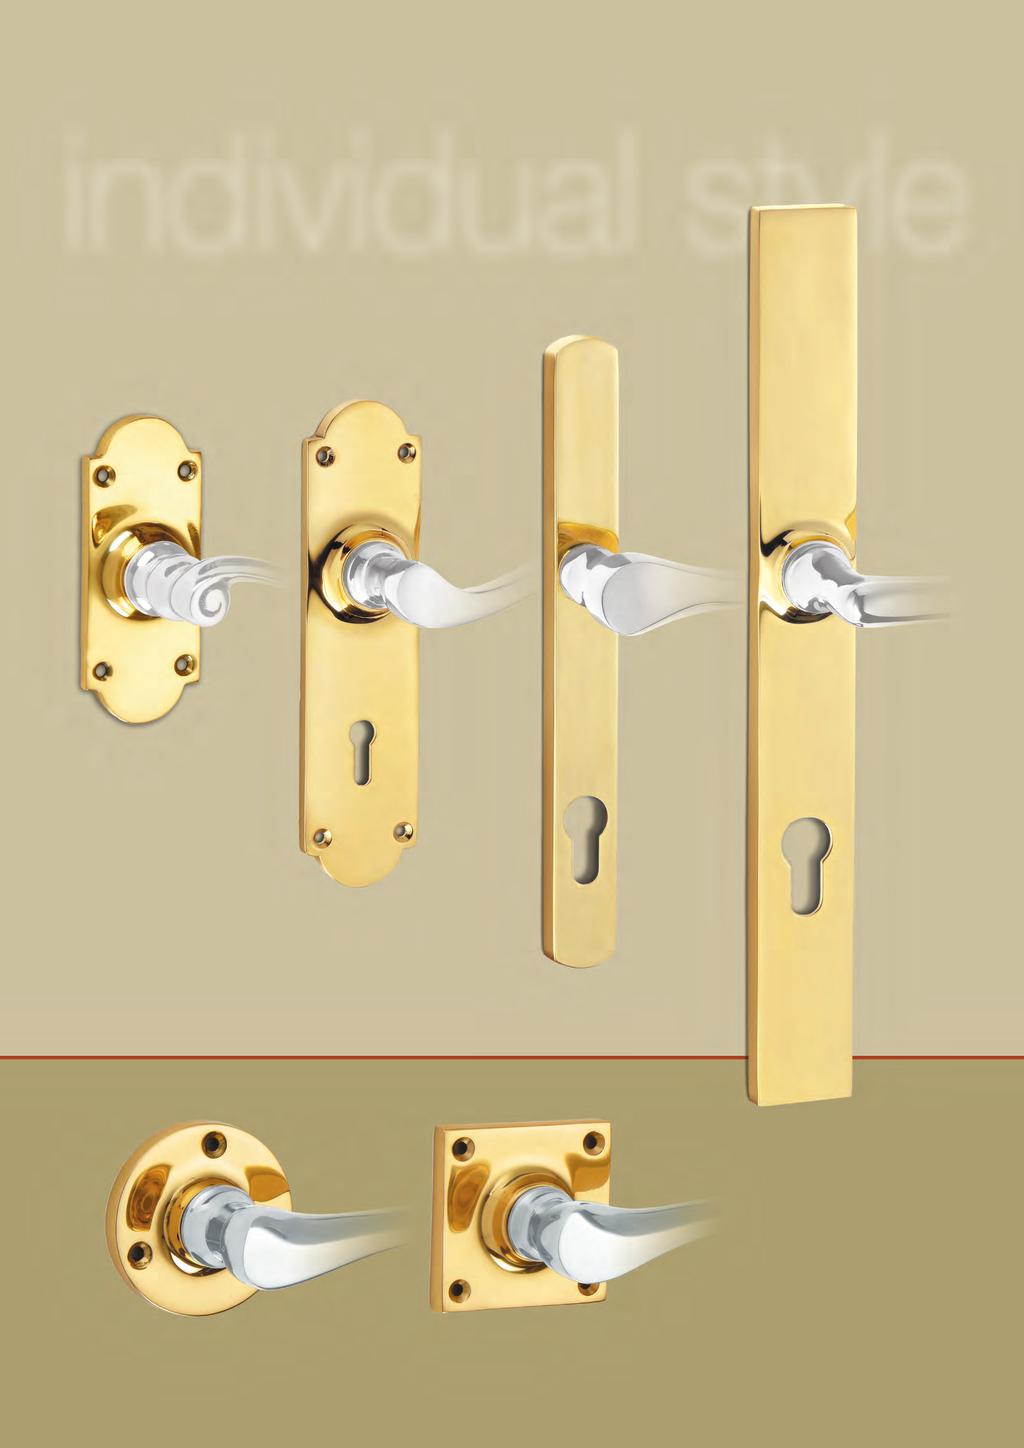 lever furniture - backplate range 100 x 41mm Arched Latch 165 x 41mm Arched Lock (shown) 240 x 26mm * + Euro Profile (shown) 305 x 35mm * + Euro Profile (shown) * Suitable for use with